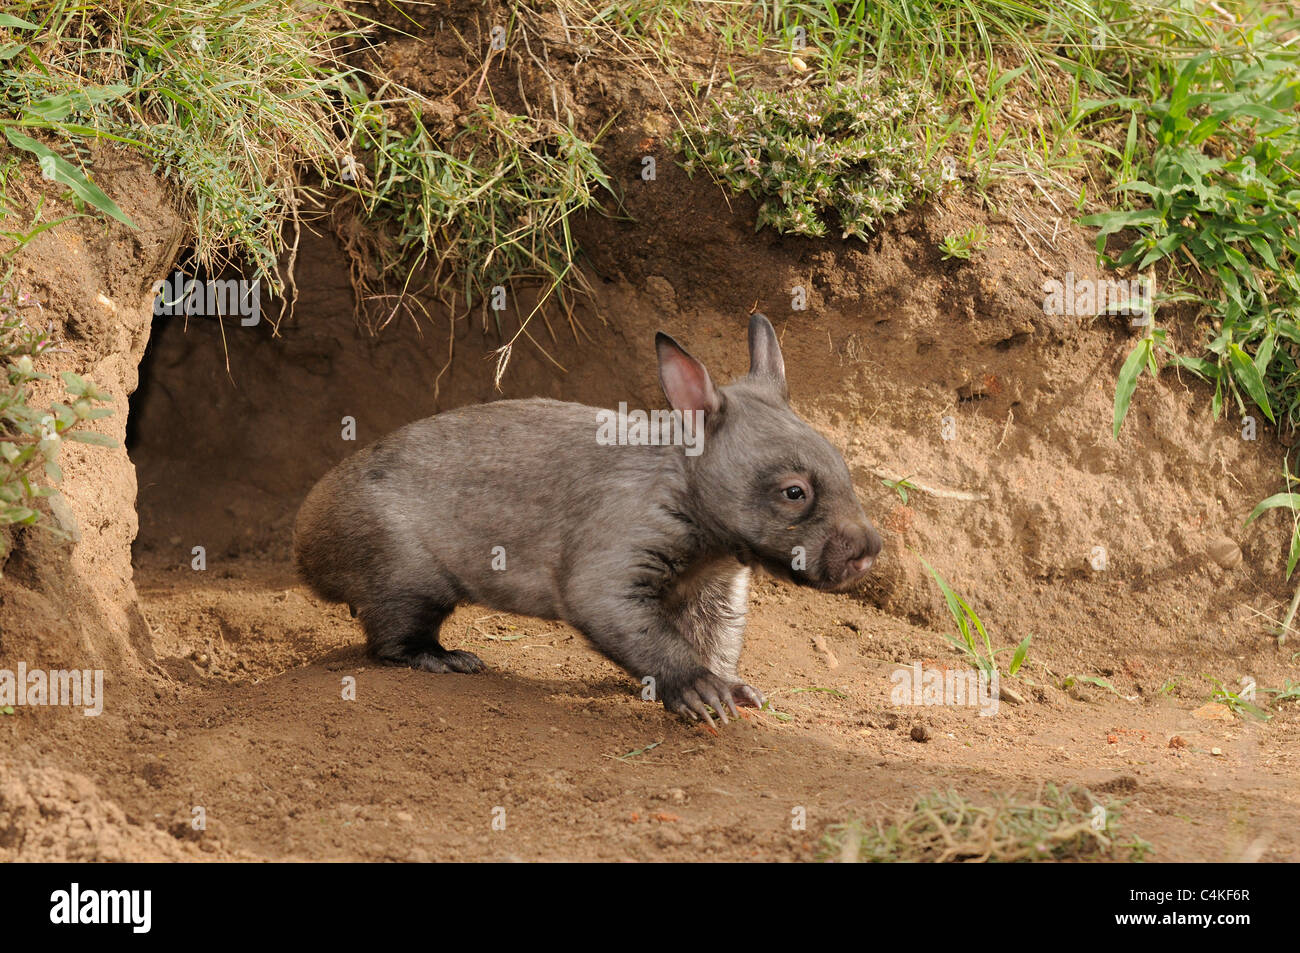 Southern Hairy-nosed Wombat Lasiorhinus latifrons Juvenile at burrow entrance . Captive. Photographed in Queensland, Australia Stock Photo